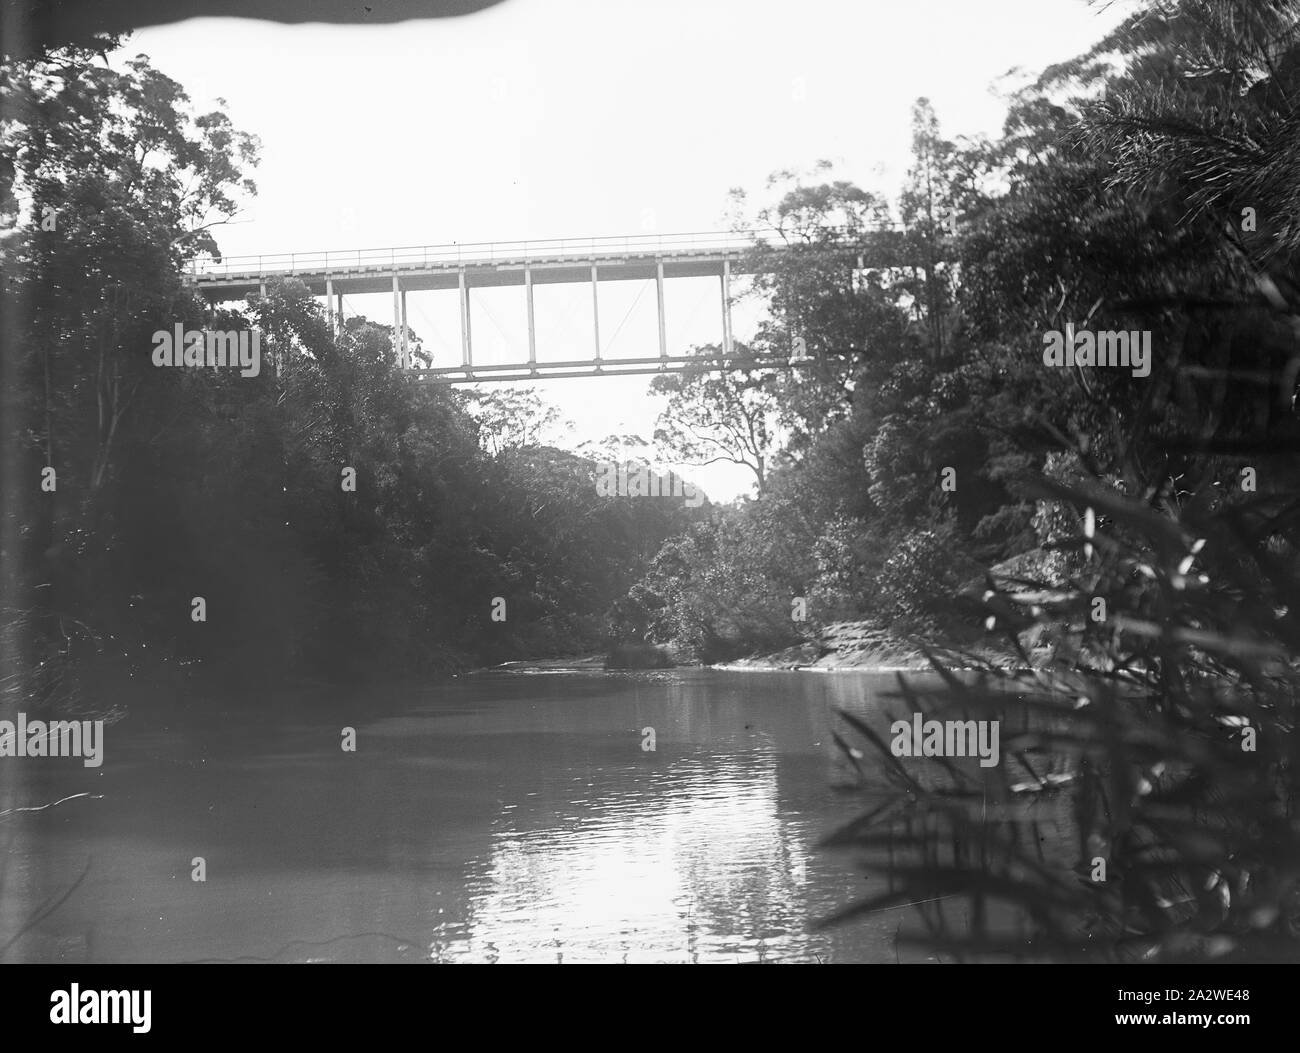 Glass Negative - Bridge Over River, circa 1900s, Black and white 1/4 plate glass negative featuring low angle shot of a bridge over a secluded river, surrounded by bushland. Likely a rail bridge. This photograph was likely taken circa 1900s. This is one of twelve negatives originally housed in an Imperial Special Rapid Plates box featuring scenes in Sydney and a picnic at an unknown location, presumably in New South Wales or Victoria Stock Photo